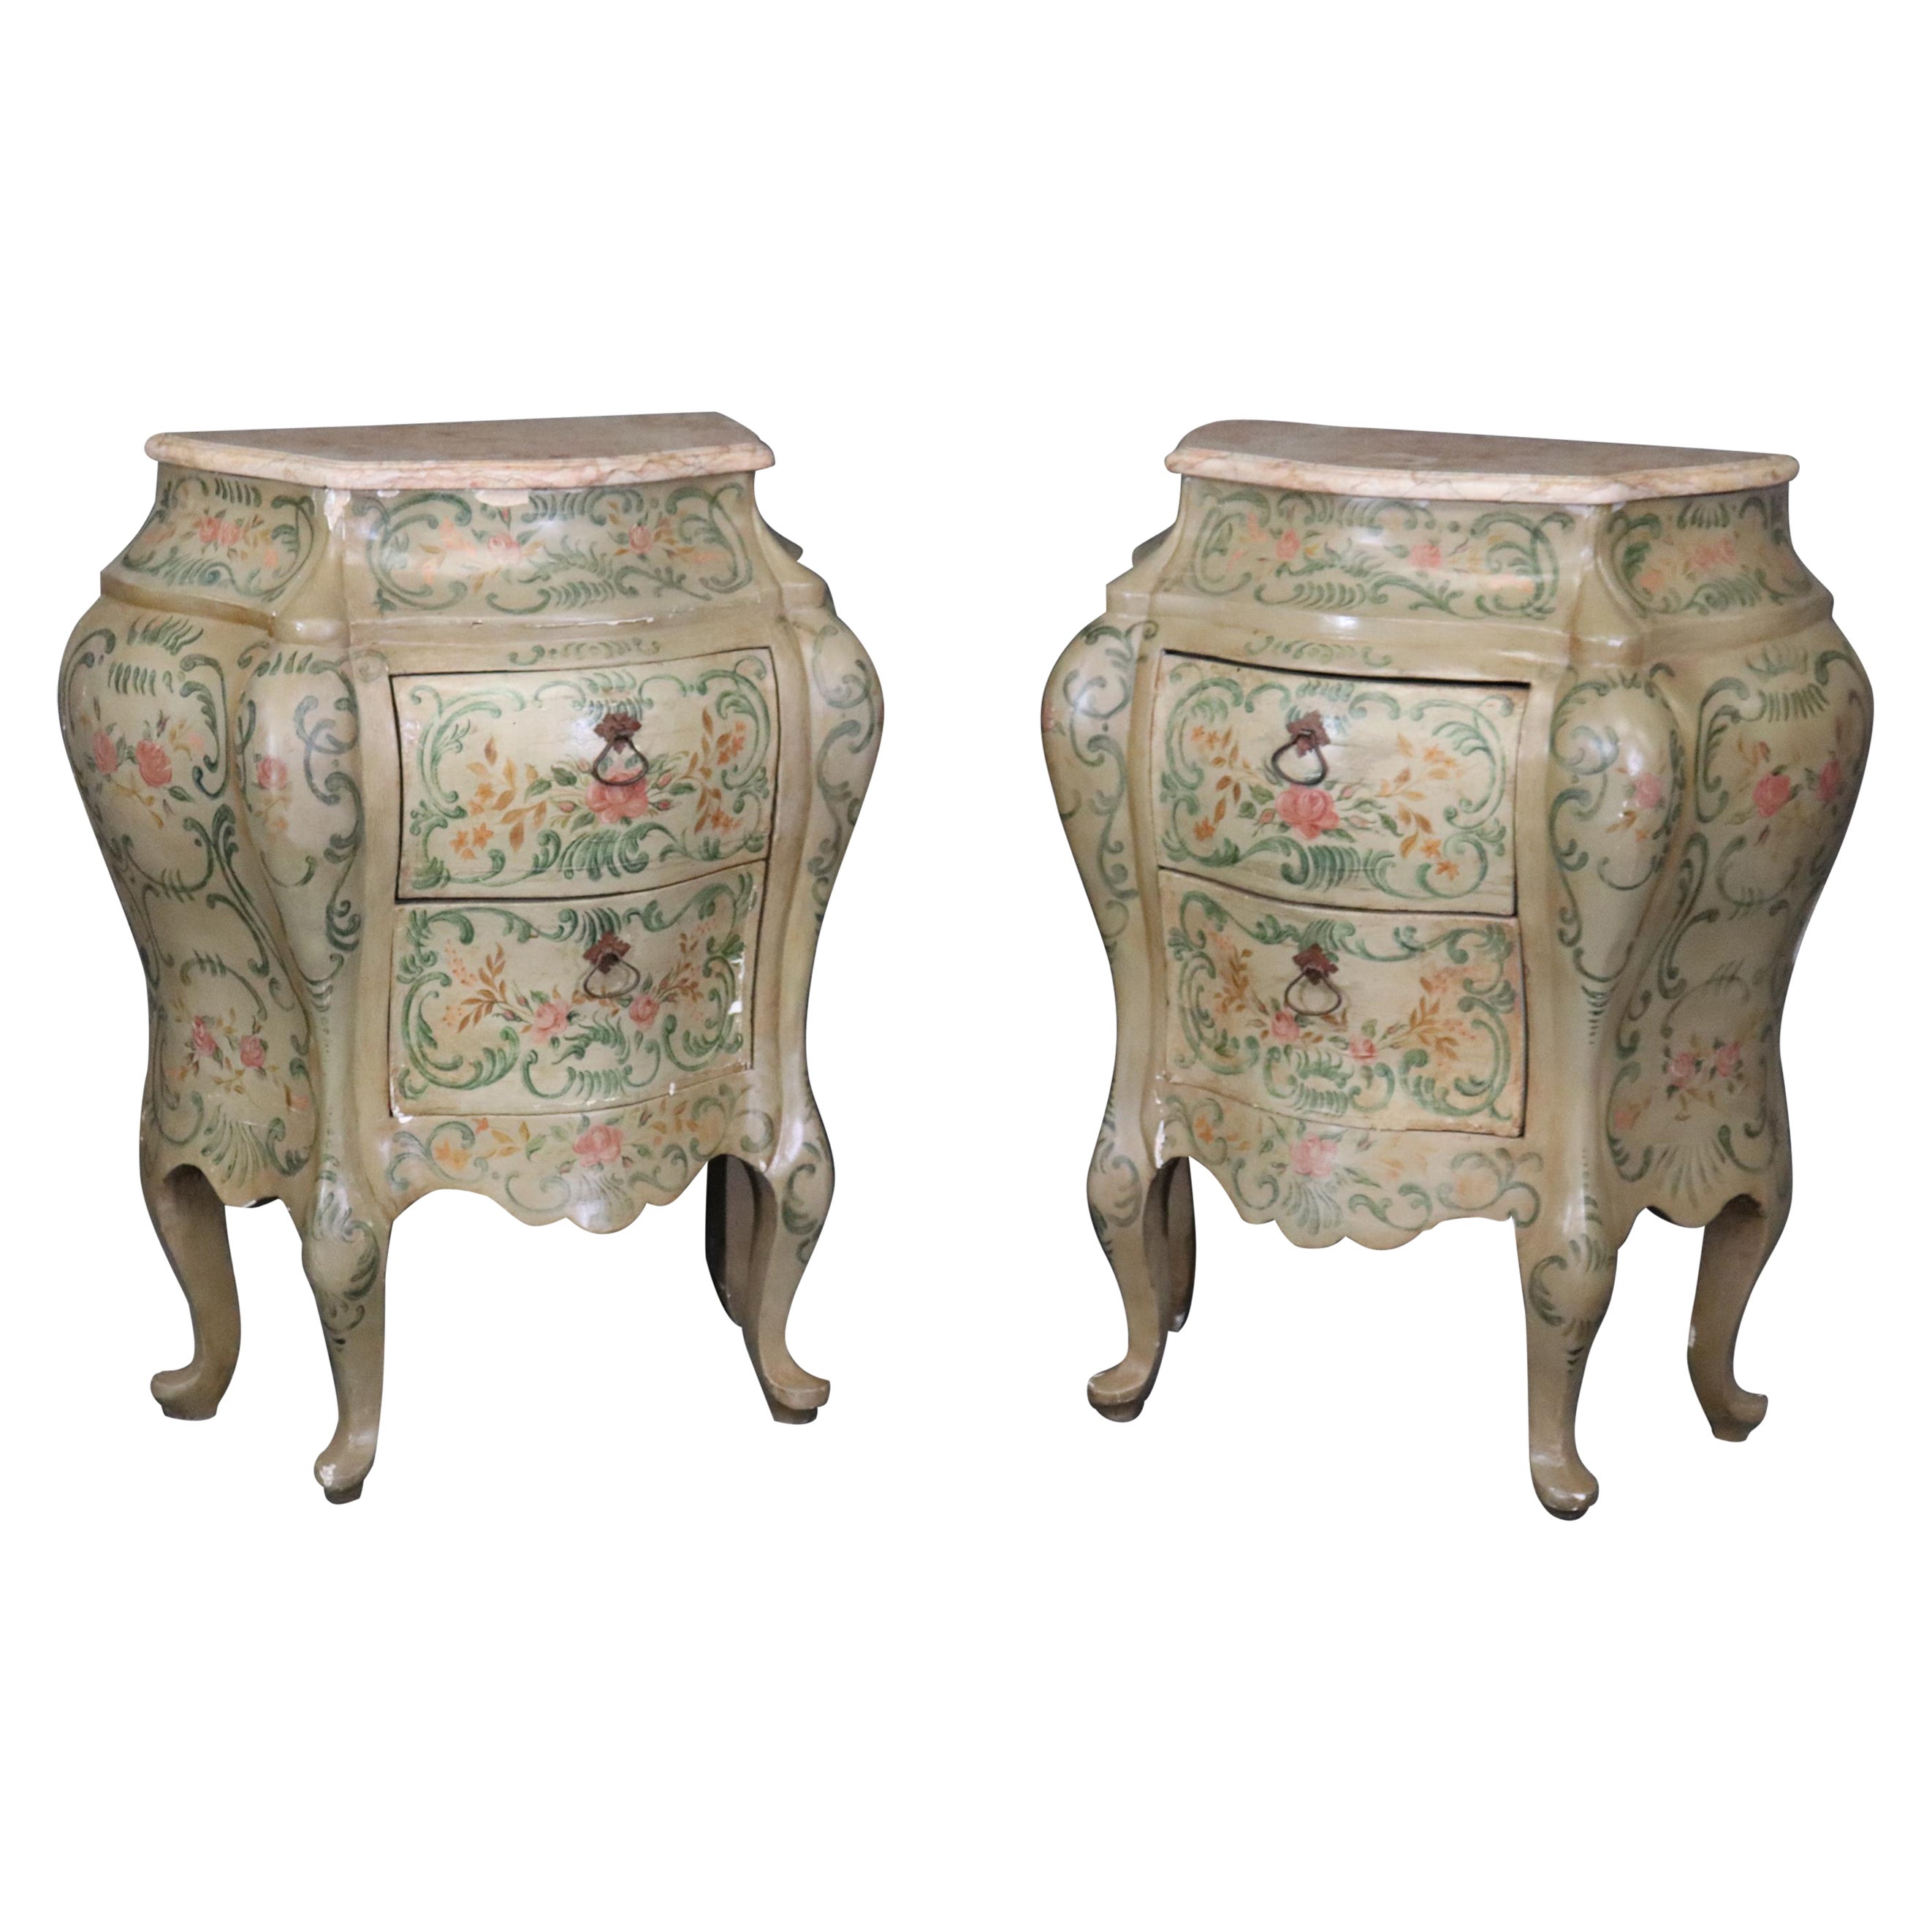 Rare Pair 18th Century Venetian Paint Decorated Marble Top Commodes Nightstands  For Sale